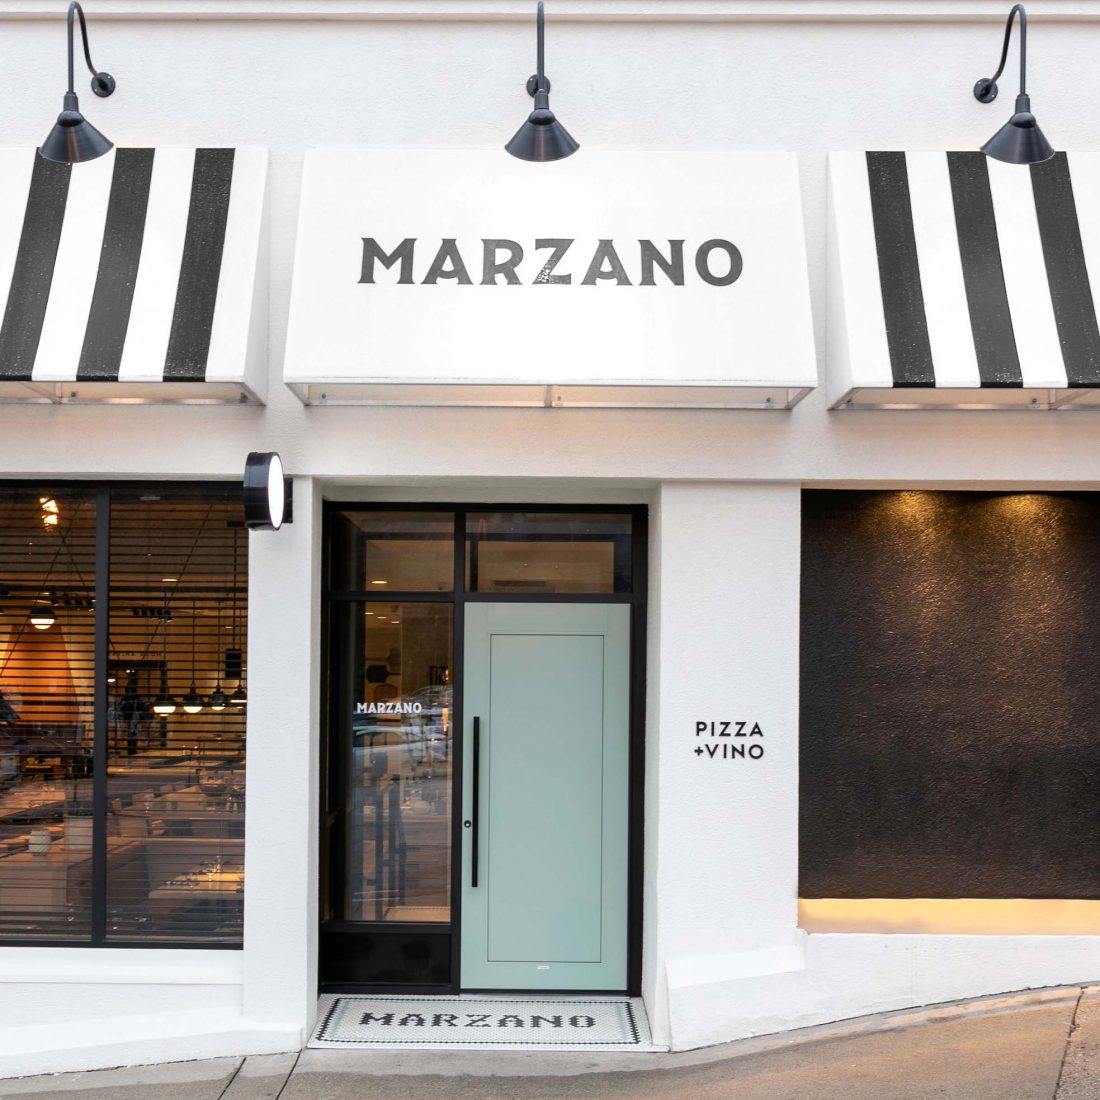 Black and white awnings hanging above a window and teal blue door, middle awning say Marzano